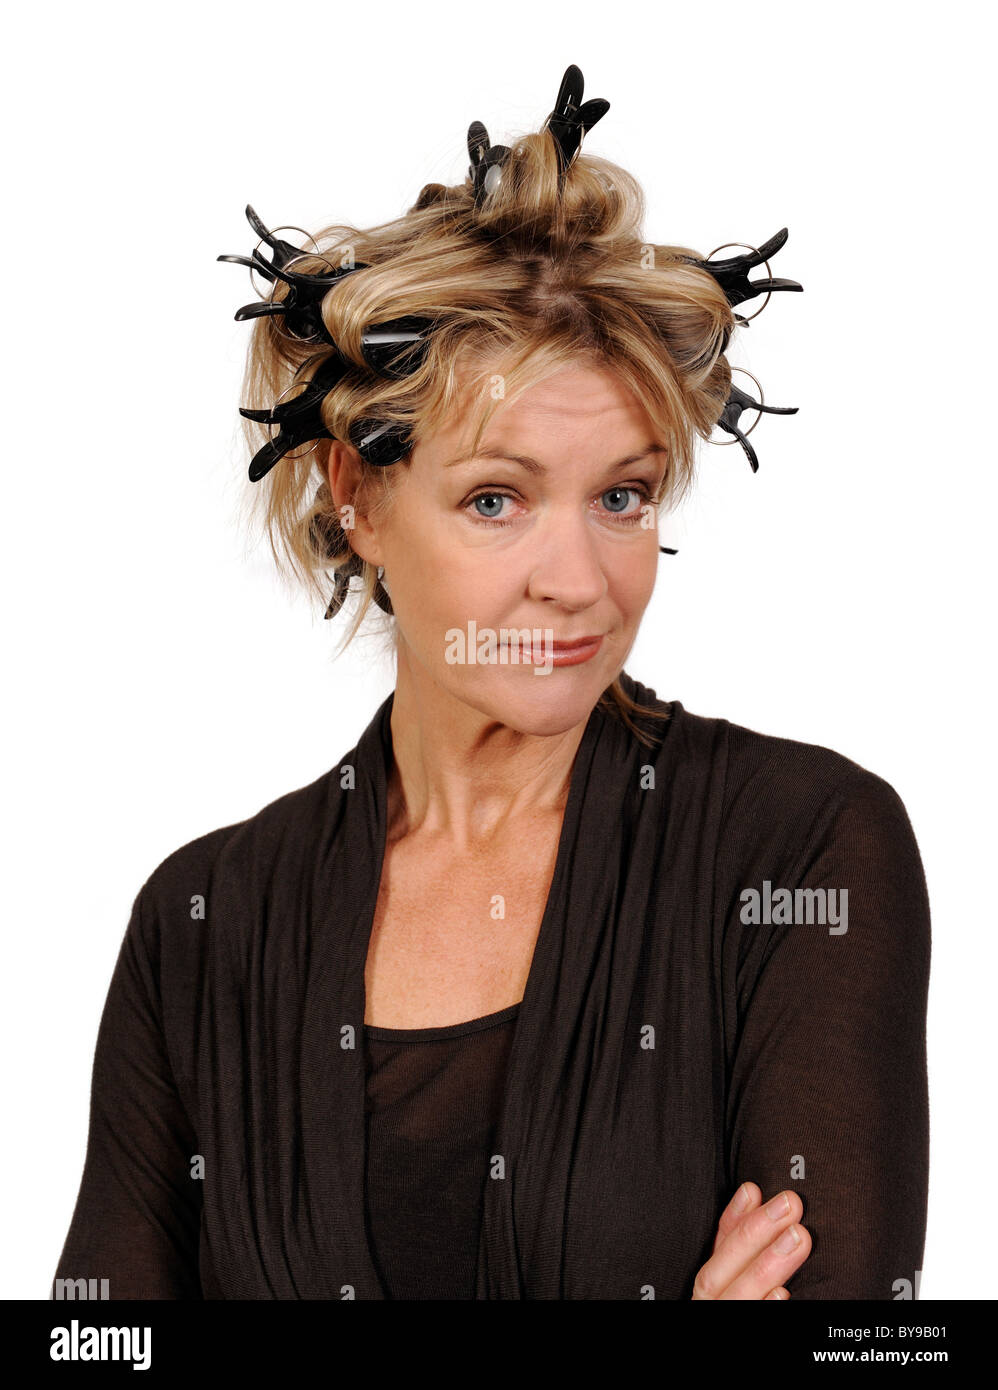 Woman wearing hair curlers Stock Photo